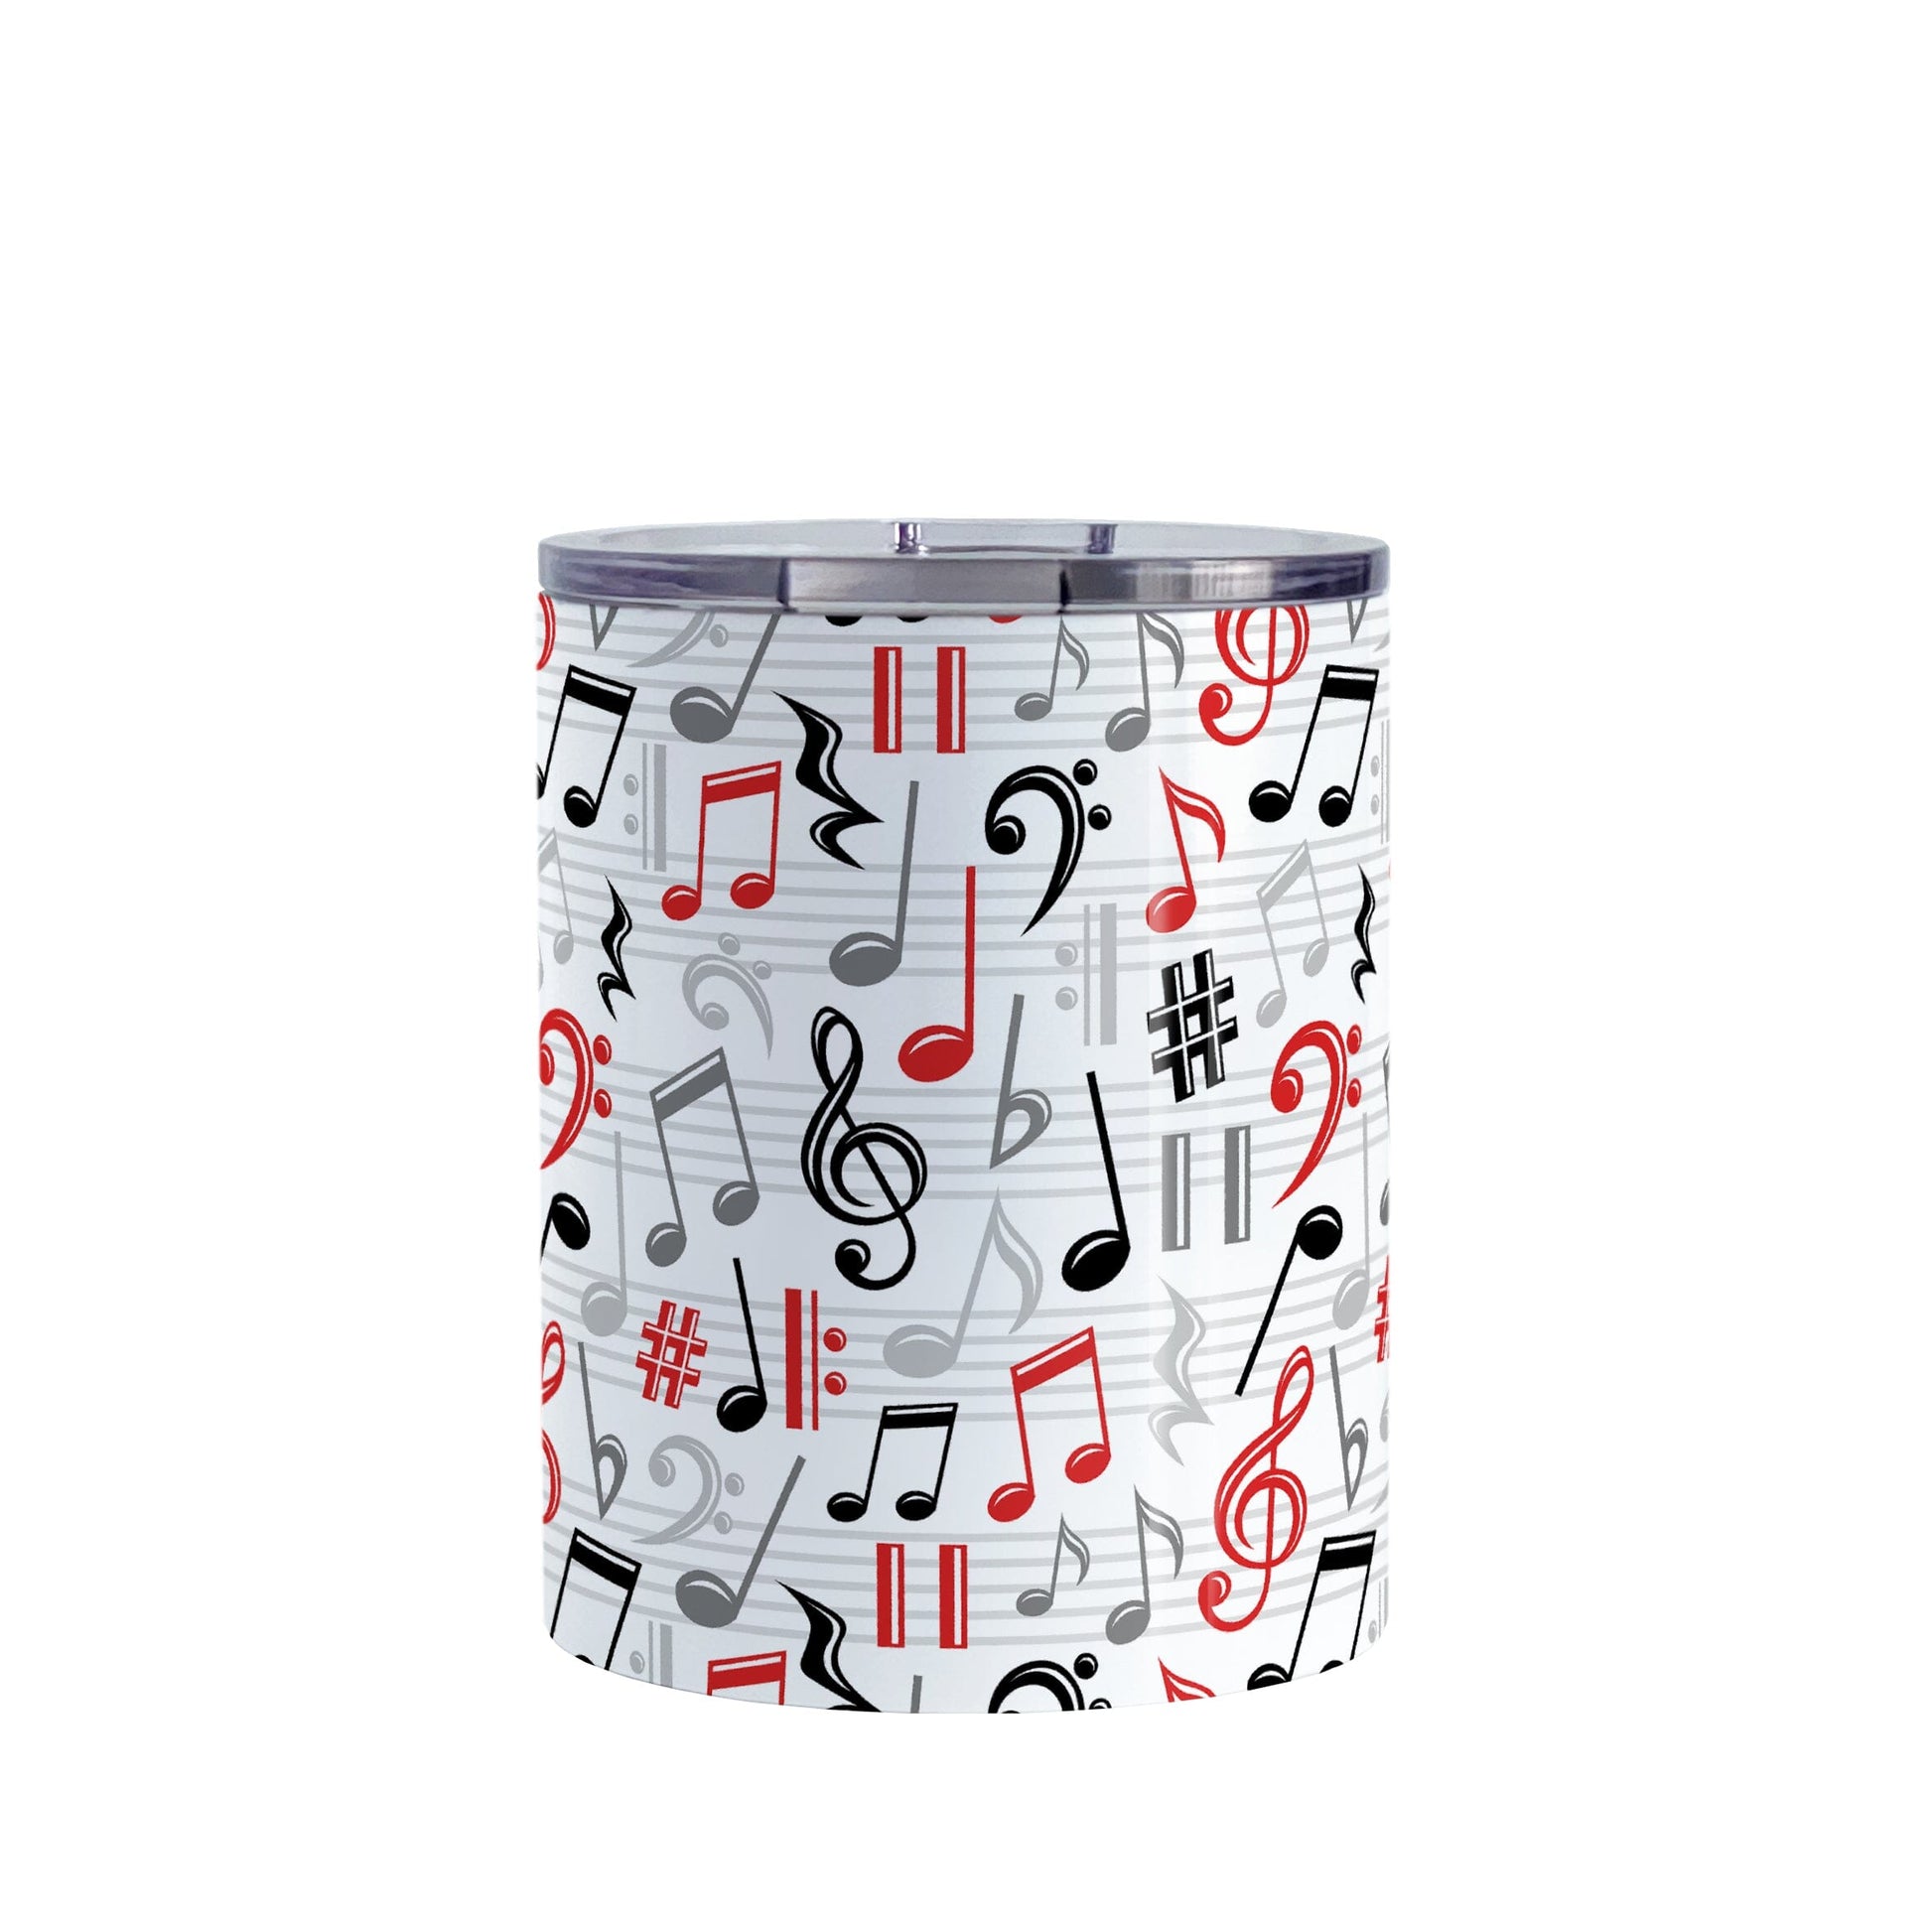 Red Music Notes Pattern Tumbler Cup (10oz) at Amy's Coffee Mugs. A stainless steel tumbler cup designed with music notes and symbols in red, black, and gray in a pattern that wraps around the cup.